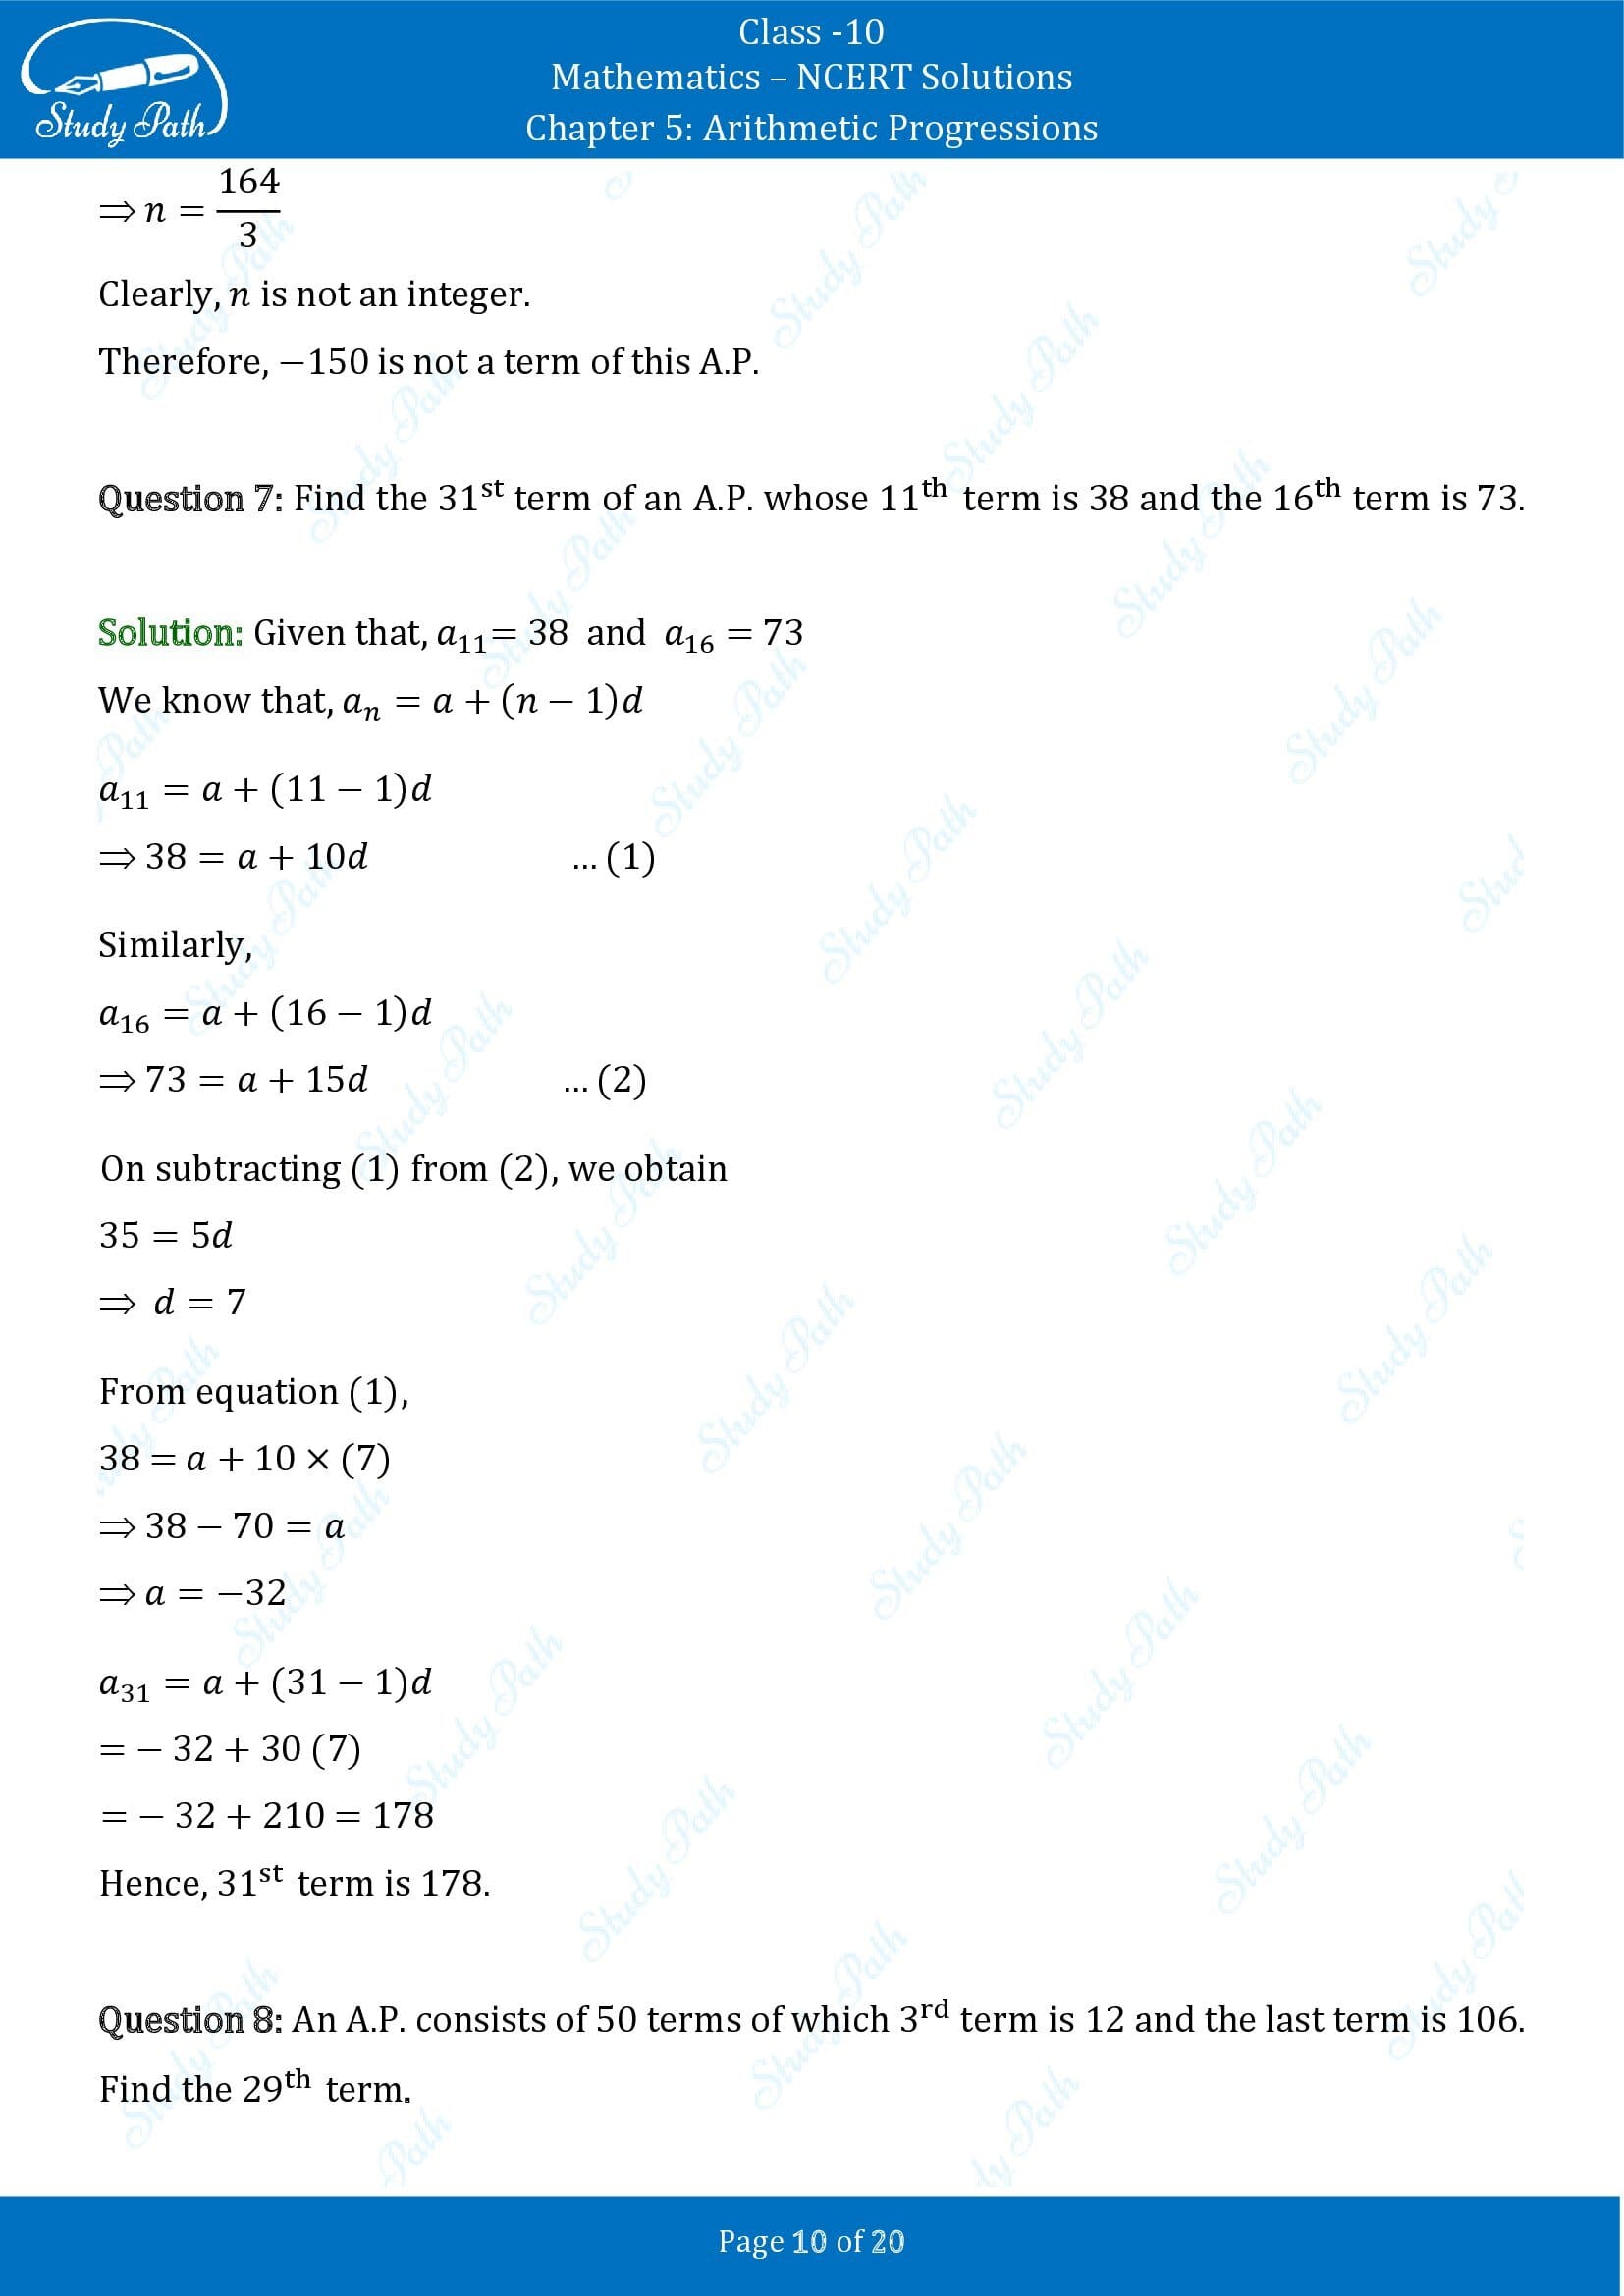 NCERT Solutions for Class 10 Maths Chapter 5 Arithmetic Progressions Exercise 5.2 00010